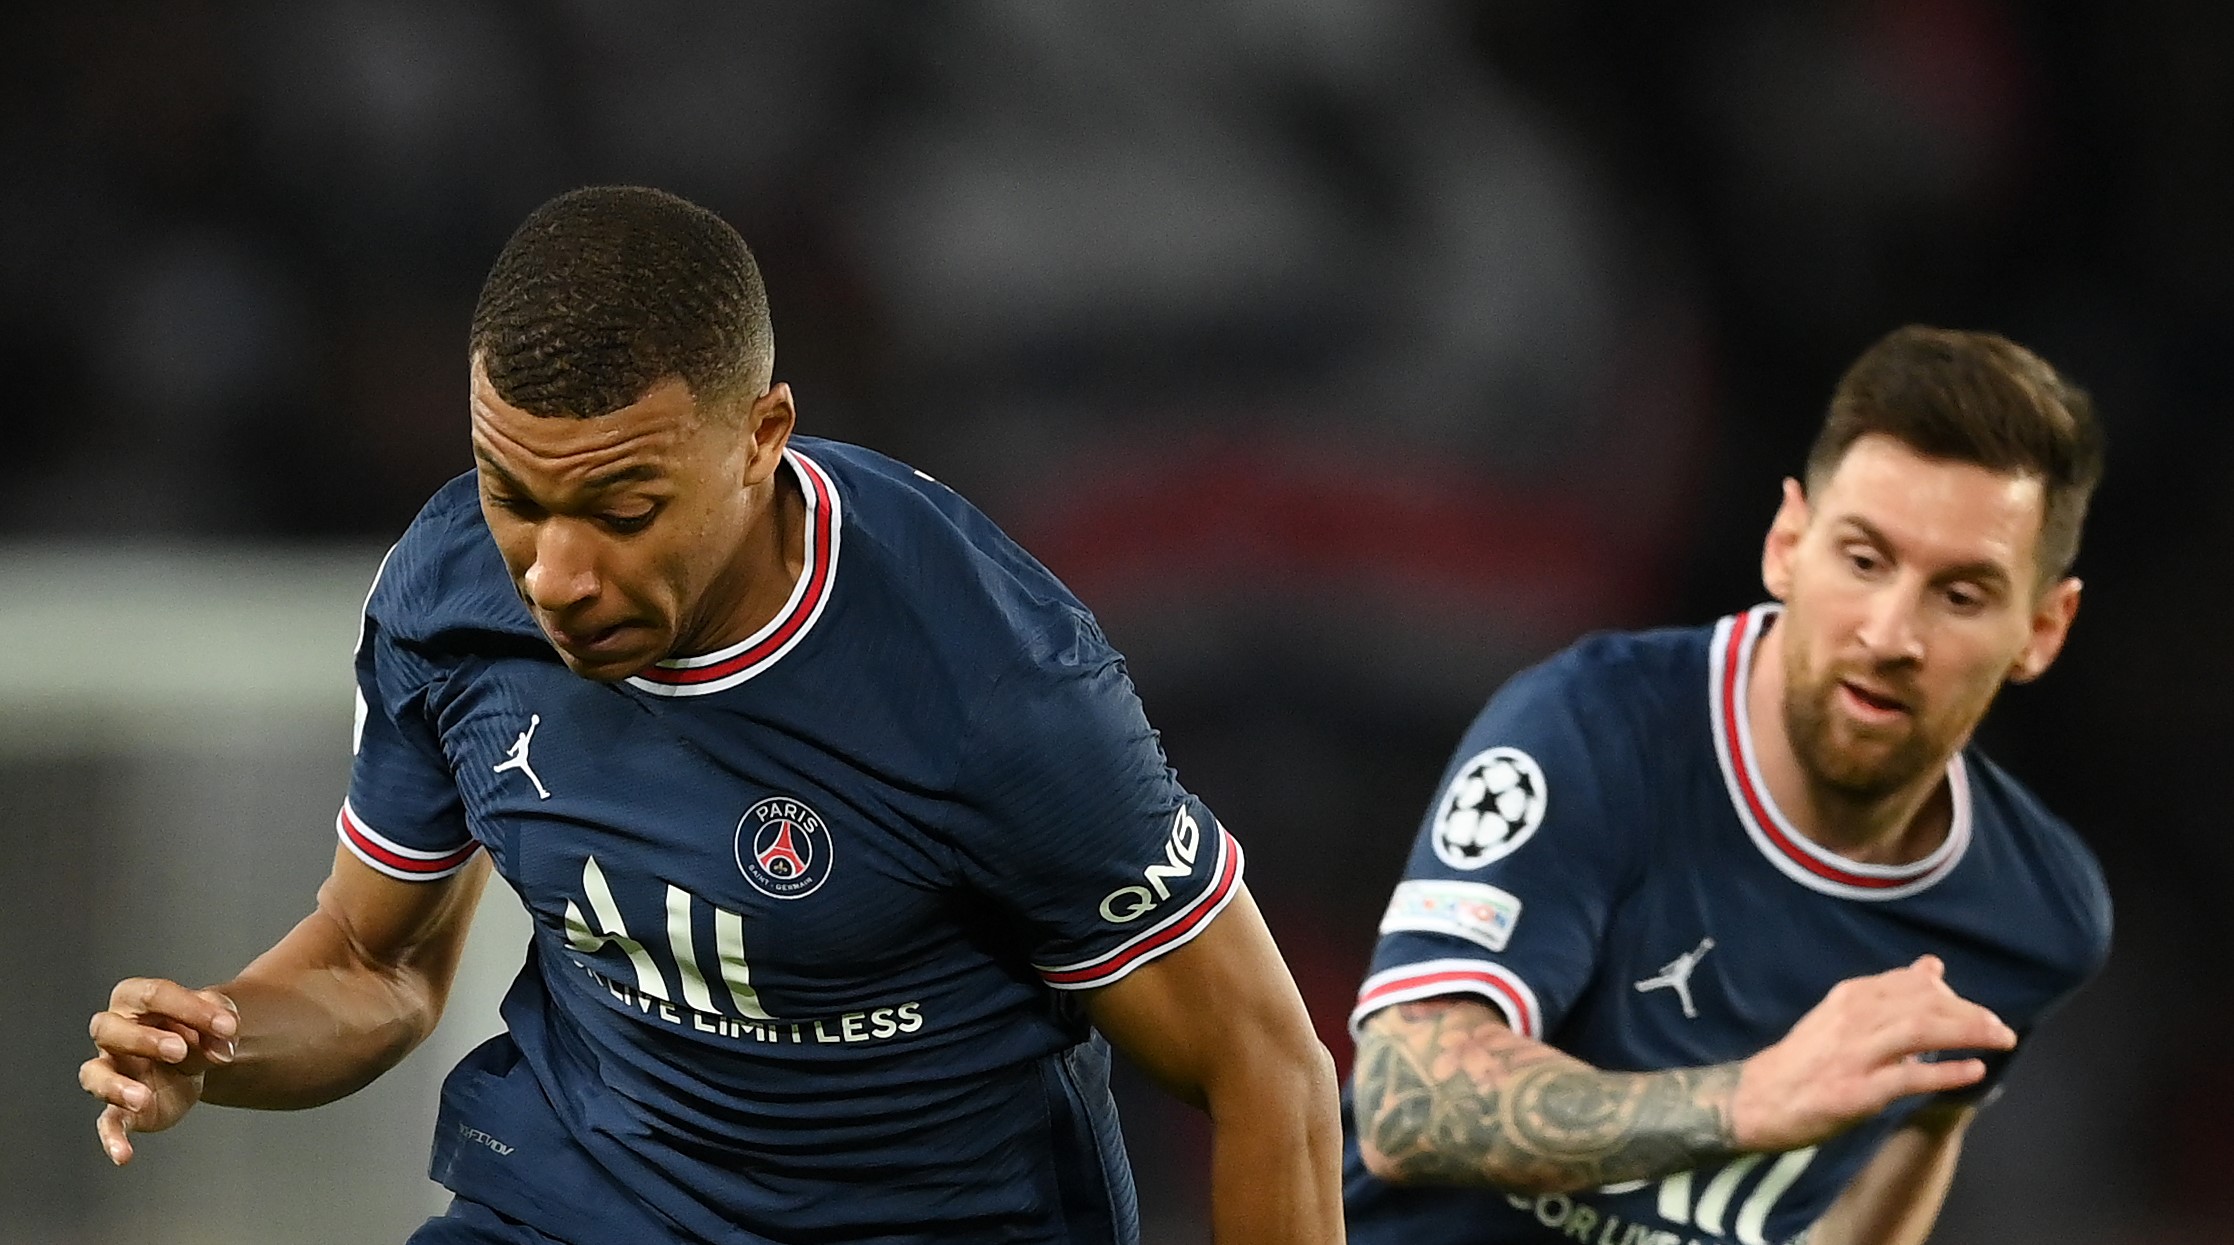 PSG's second place in Group Stage guarantees them a tough opponent for